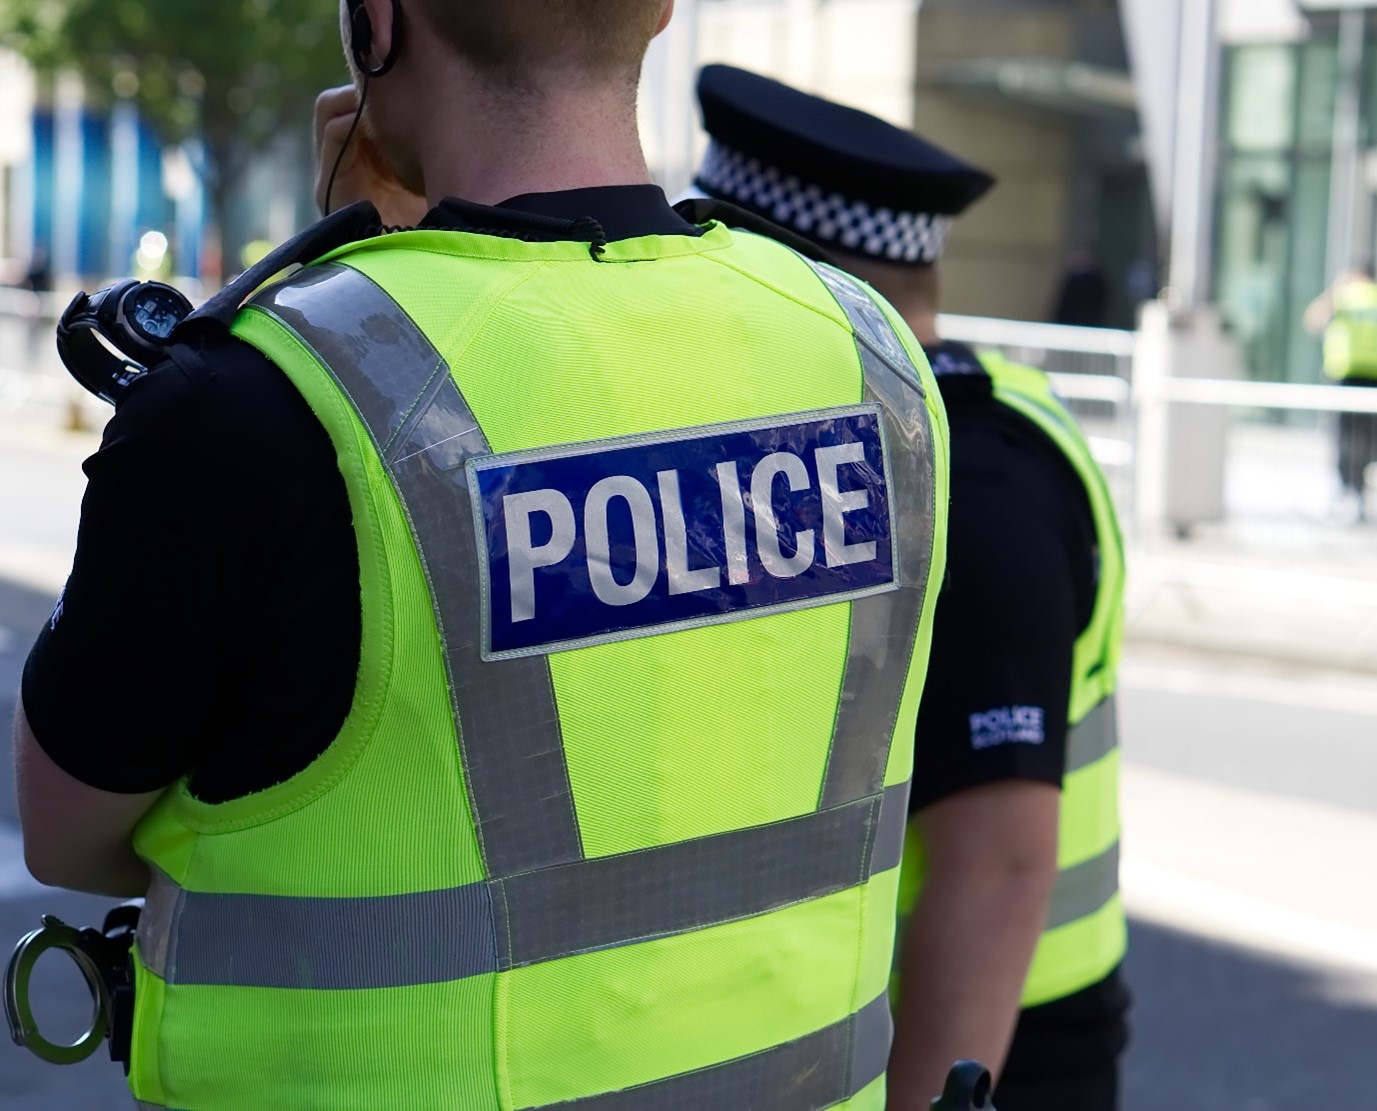 Image of the back of a police officer wearing a high-vis vest which says 'Police' on the back